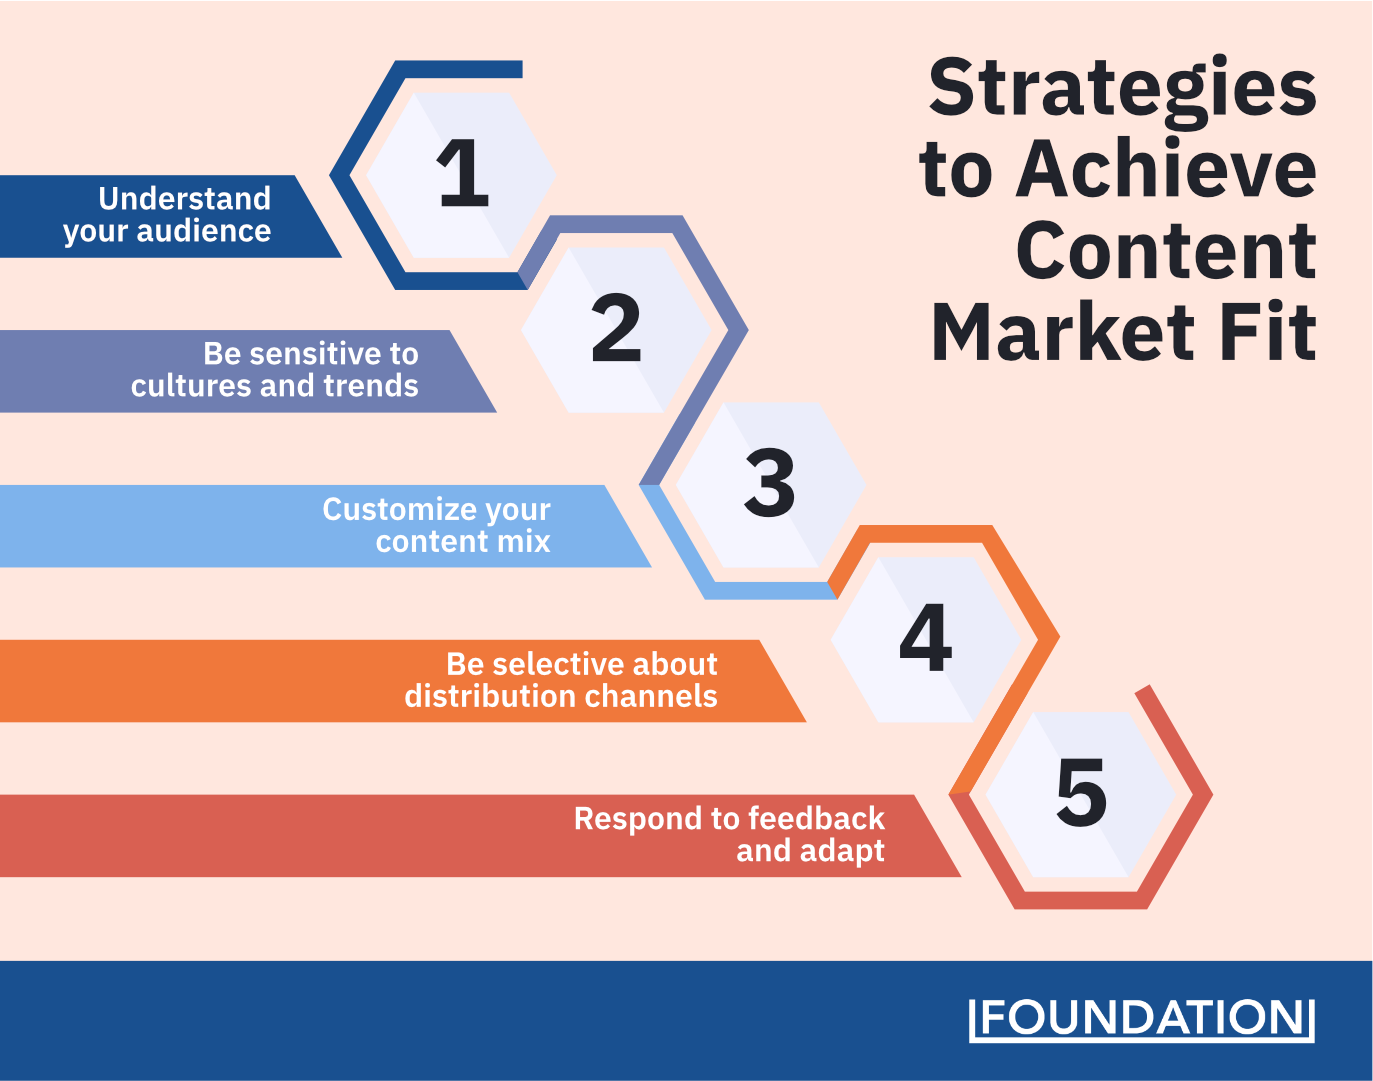 5 strategies for achieving content market fit